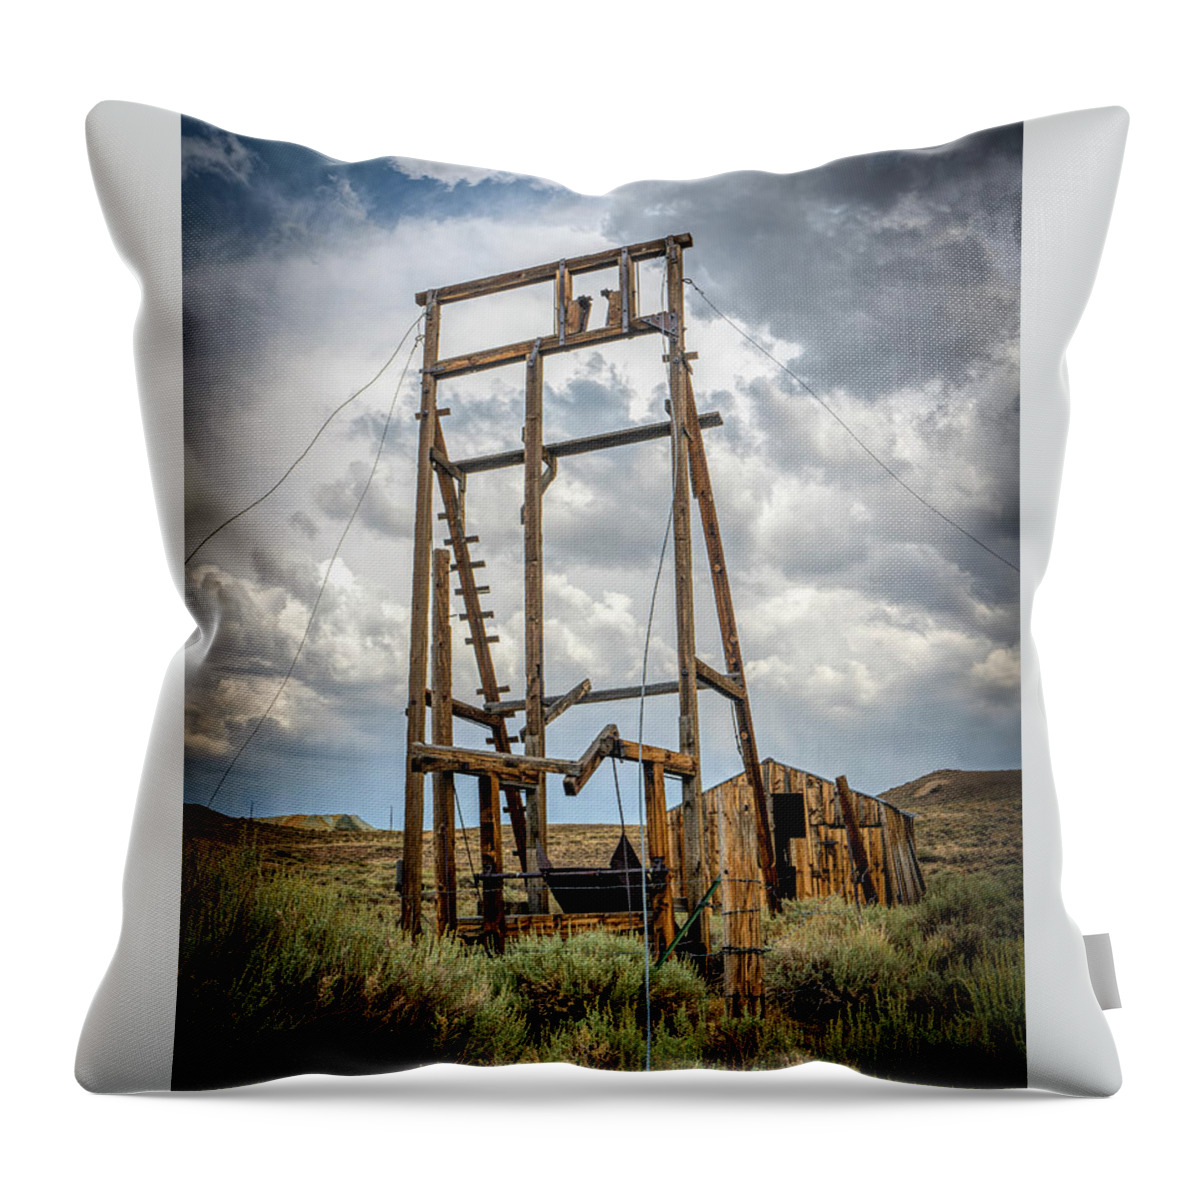 Bodie Throw Pillow featuring the photograph Played Out Vertical by Ron Long Ltd Photography